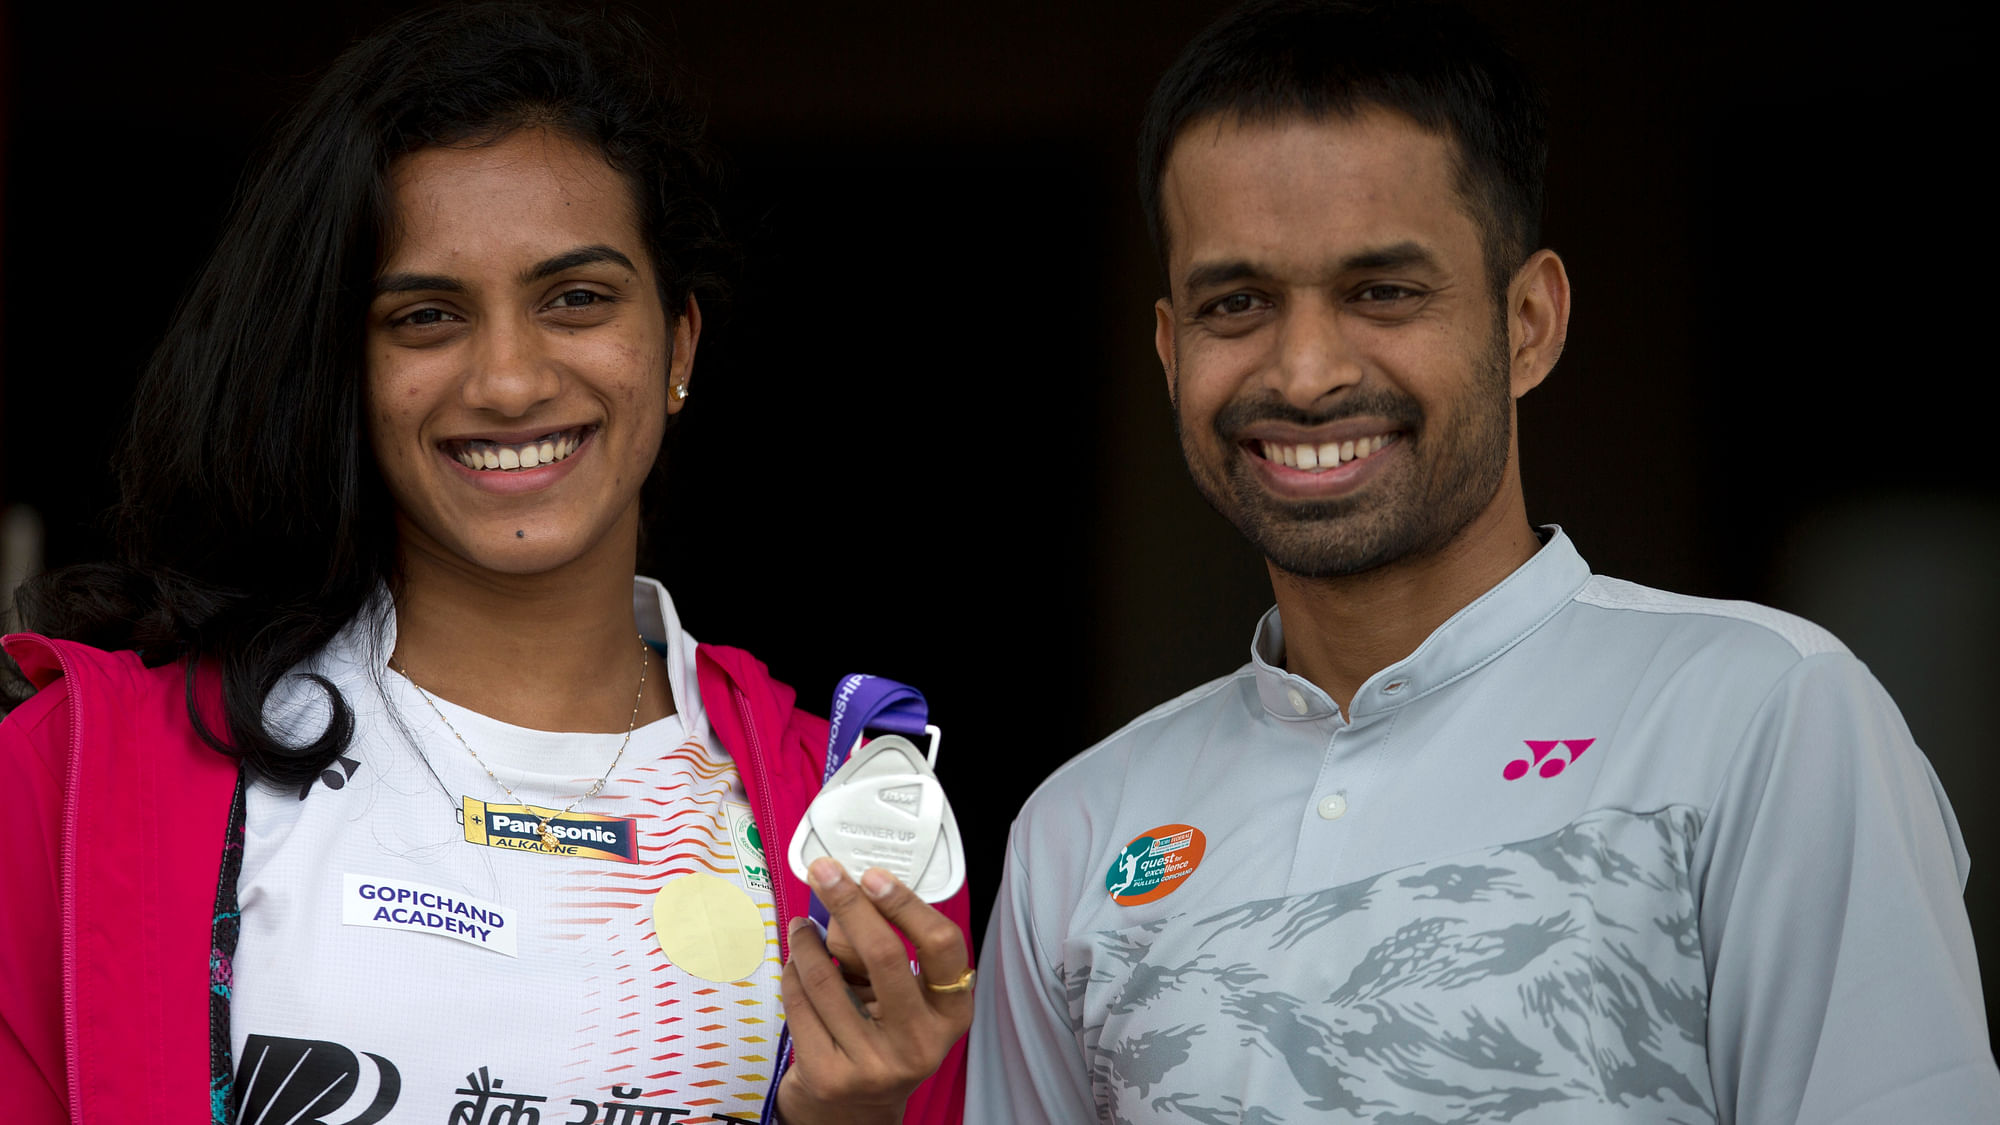 Indian Badminton player P. V. Sindhu displays her medal, with her coach Pullela Gopichand standing beside her, during a press conference in Hyderabad, India, Tuesday, Aug. 7, 2018. Sindhu won the silver medal at the BWF World Championships in Nanjing, China.